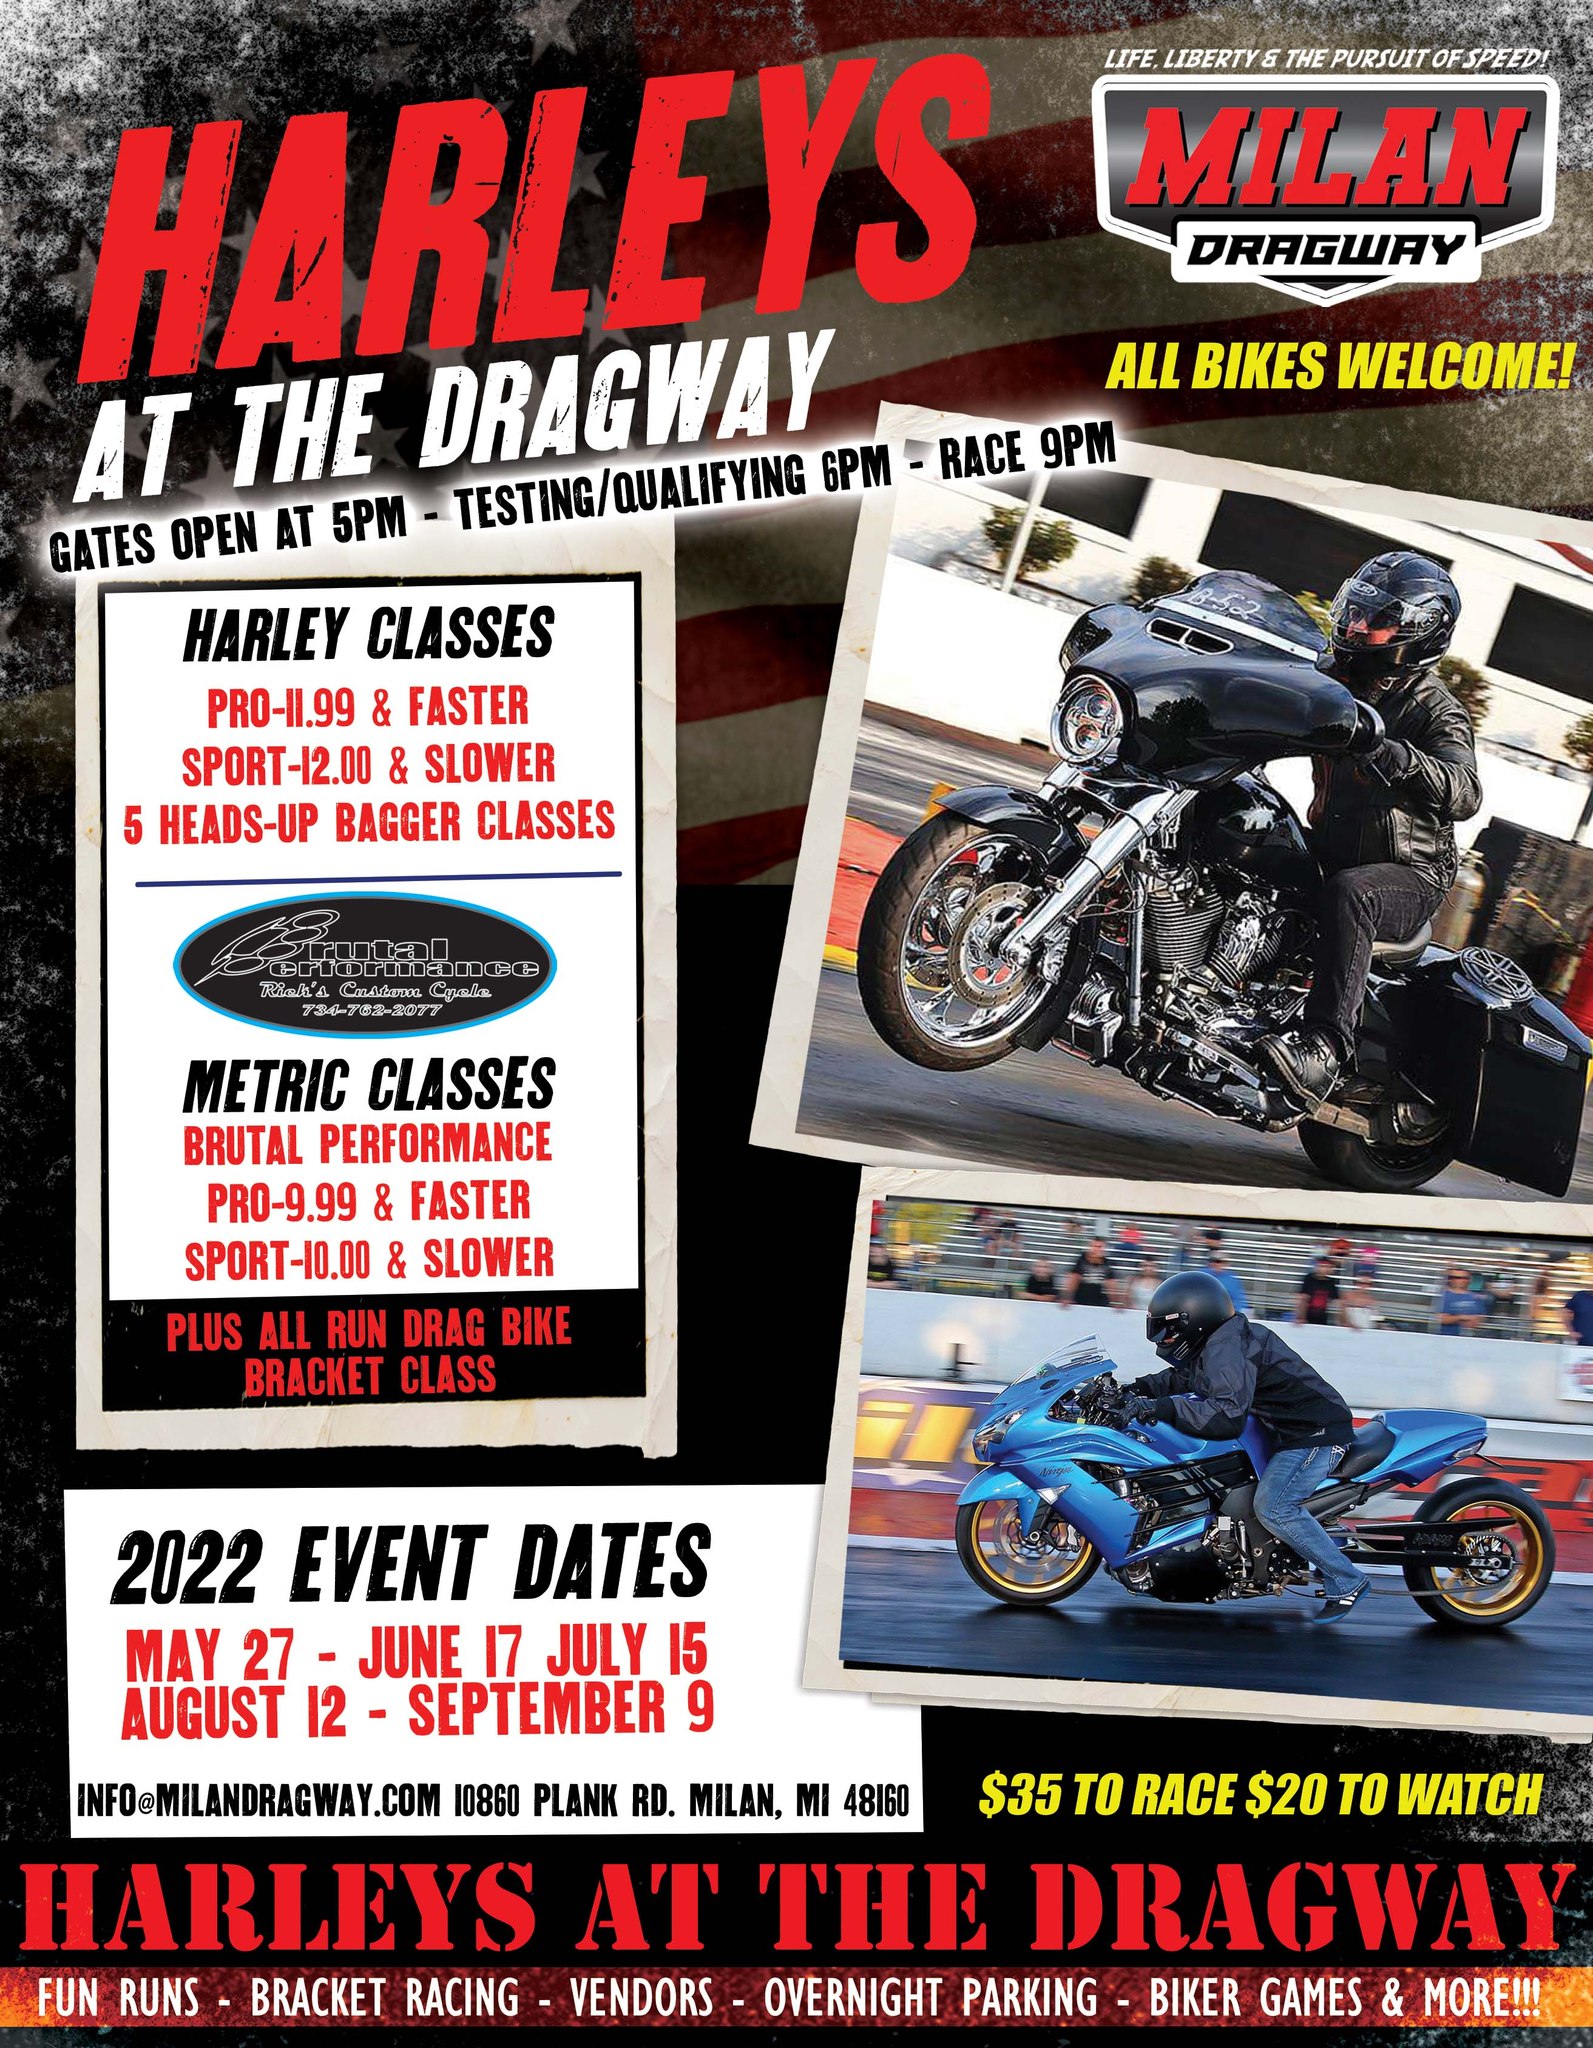 Rick’s Custom Cycle – Brutal Performance Harleys at the Dragway This Friday!